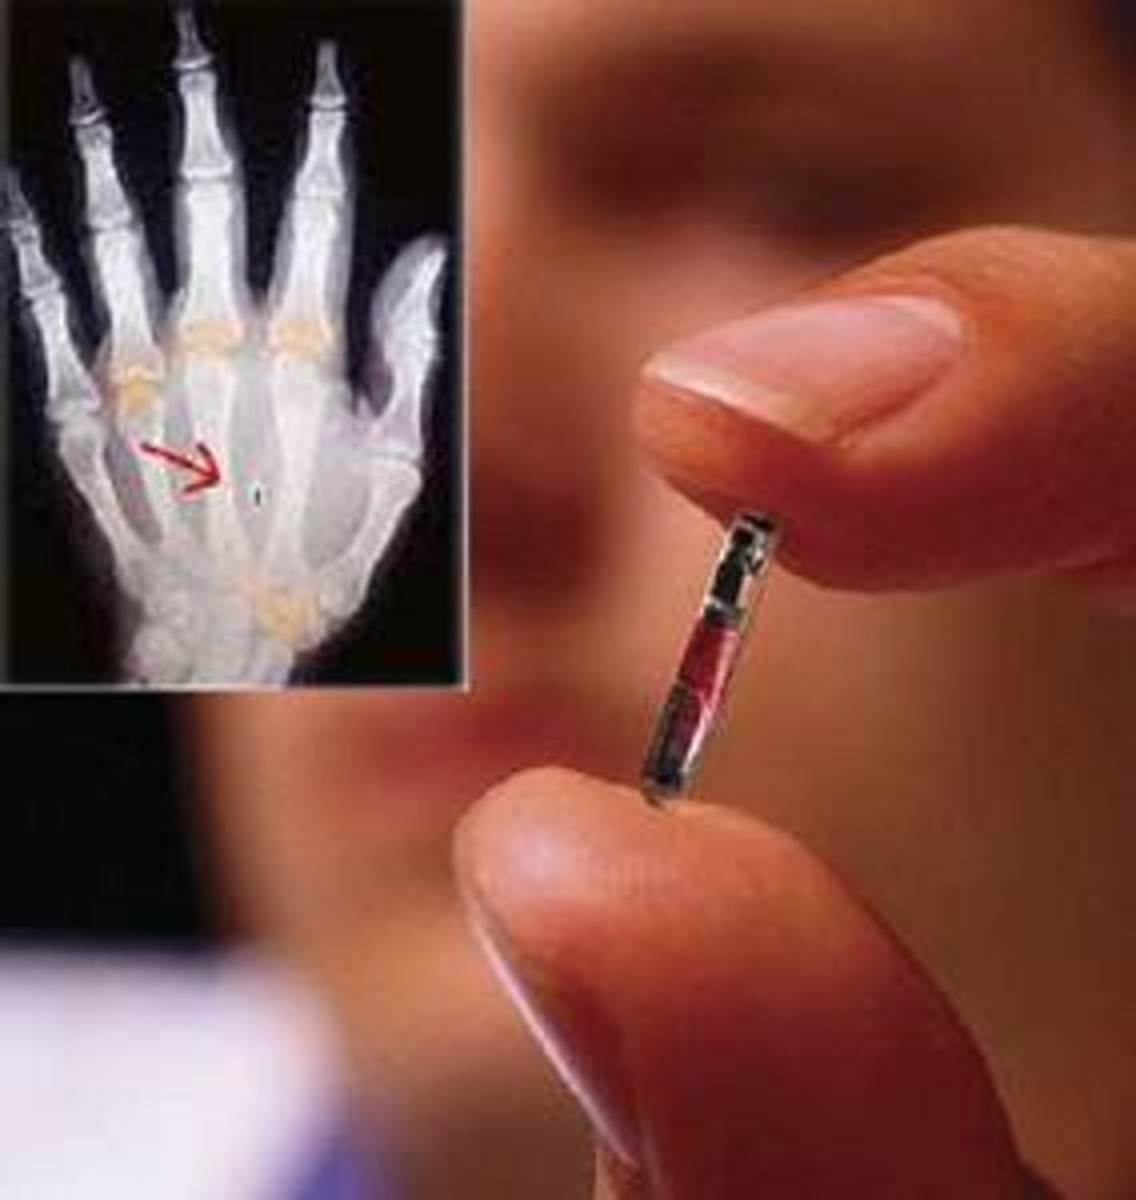 RFID Chip inserted in hand